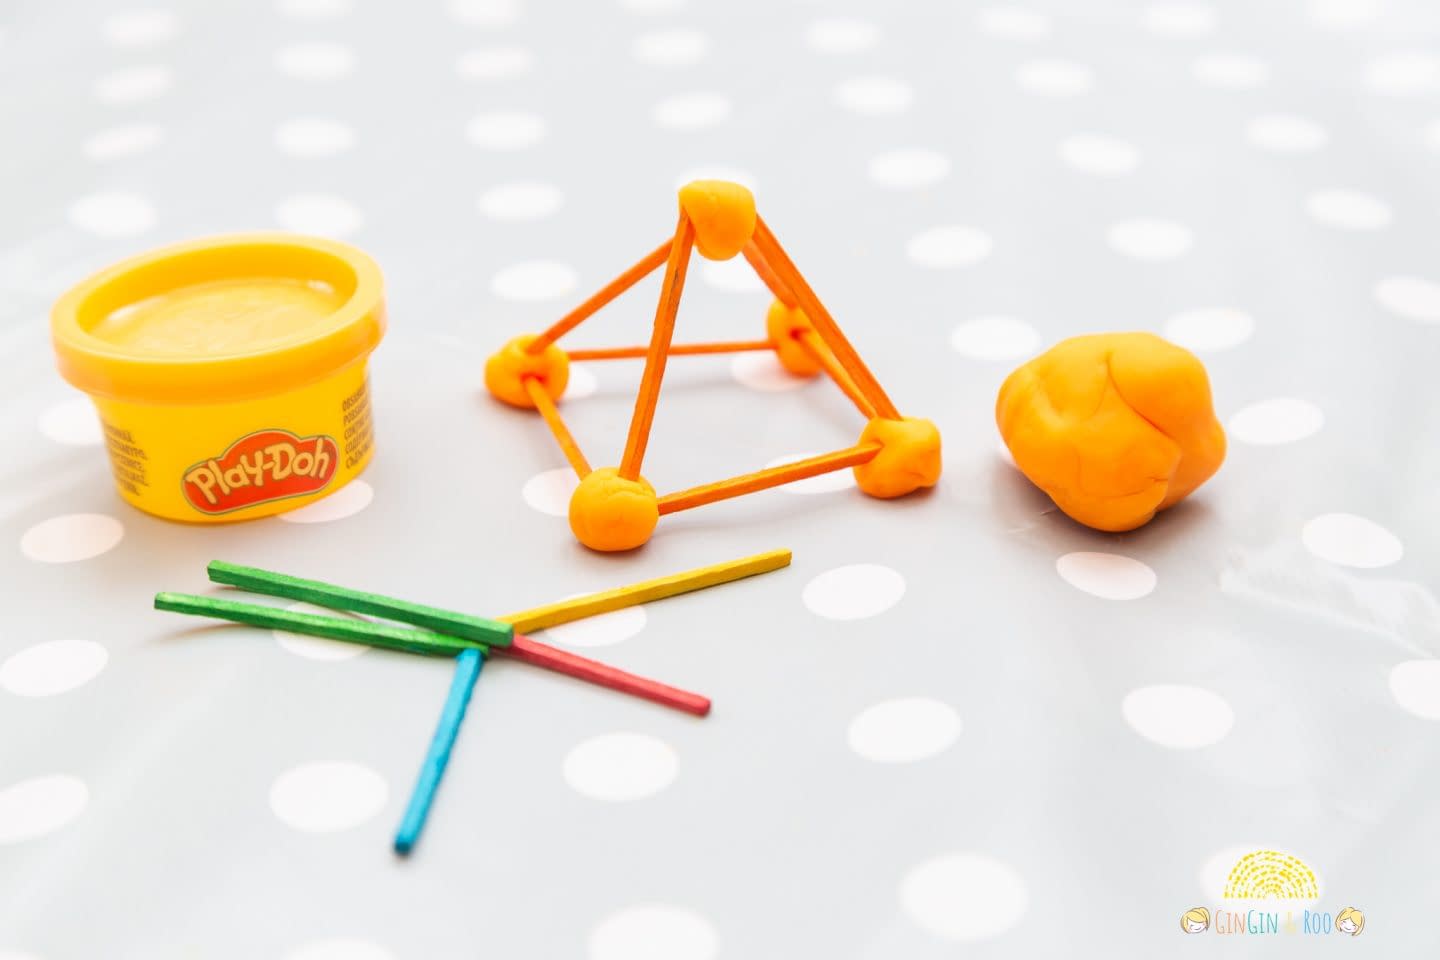 Maths is fun. No really, it is! Give this fun maths activity a try with your kids. They will love it. And they’ll learn while they’re playing, which is definitely a winner if you’re stuck for ideas of fun maths home learning activities that also keep the kiddos entertained.
#toddleractivity #toddlereducation #toddlerlearn